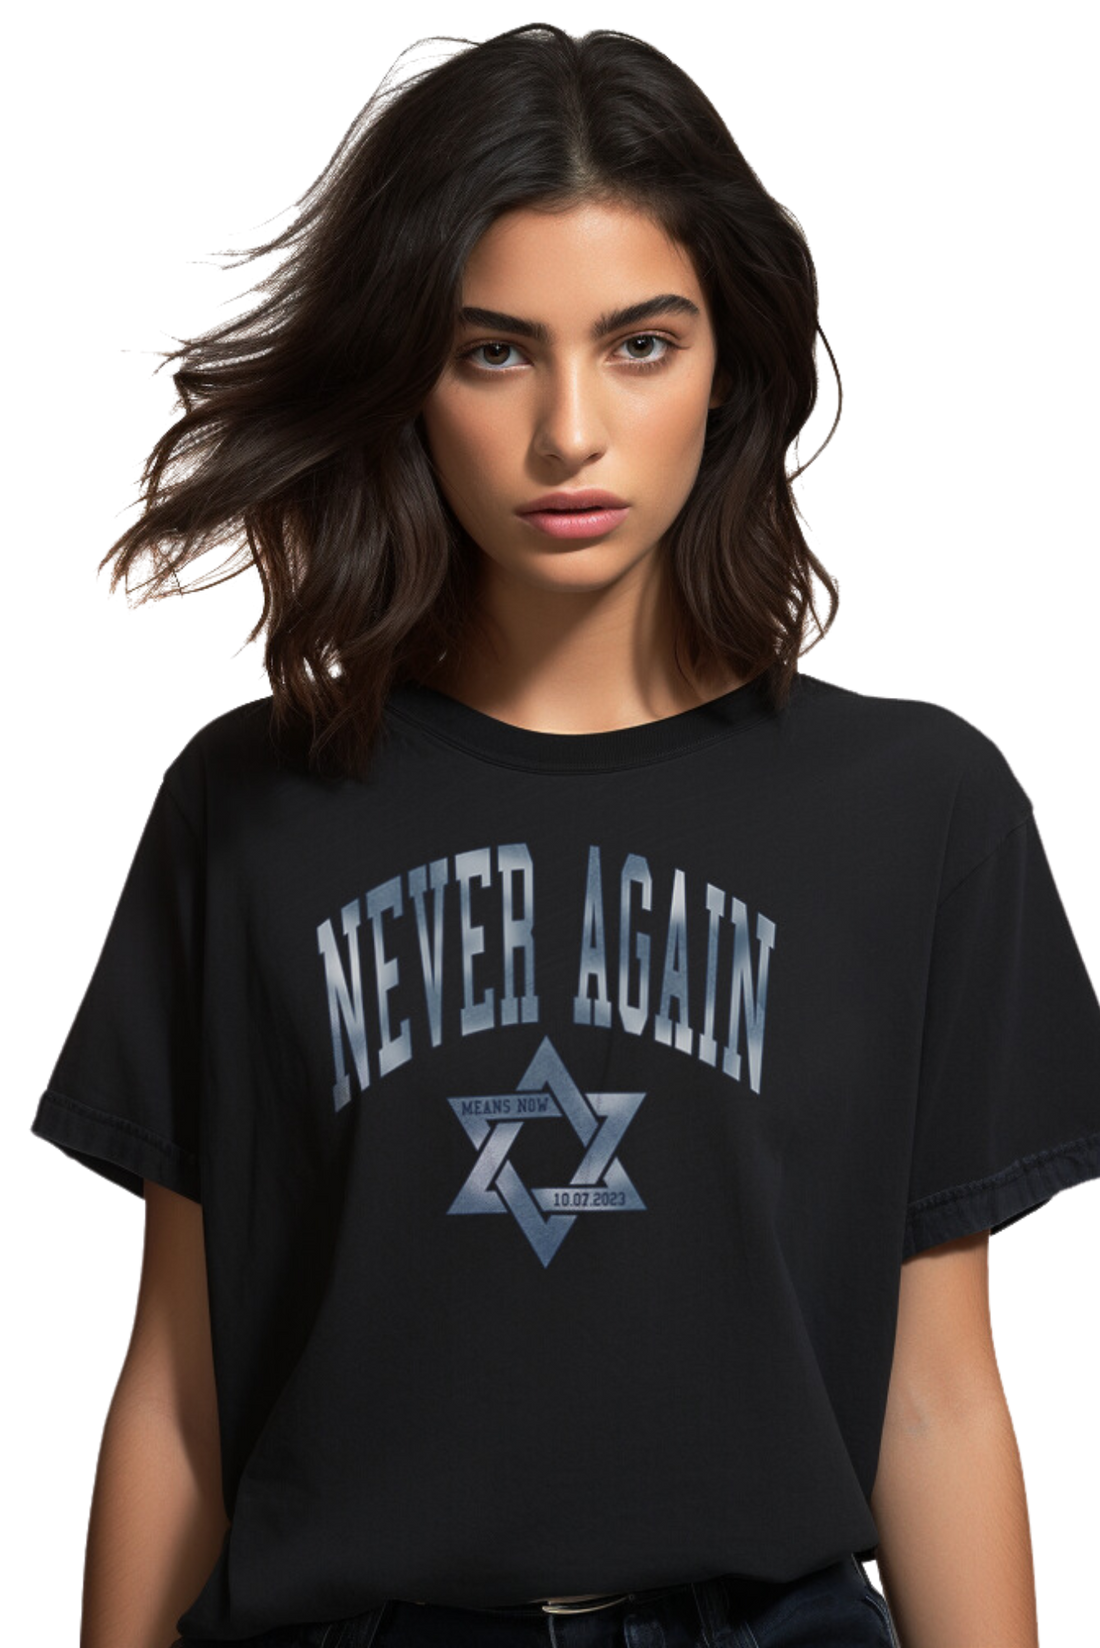 OVERSIZED Never Again Means Now Tee by  Stand With Us x Perspective Fitwear